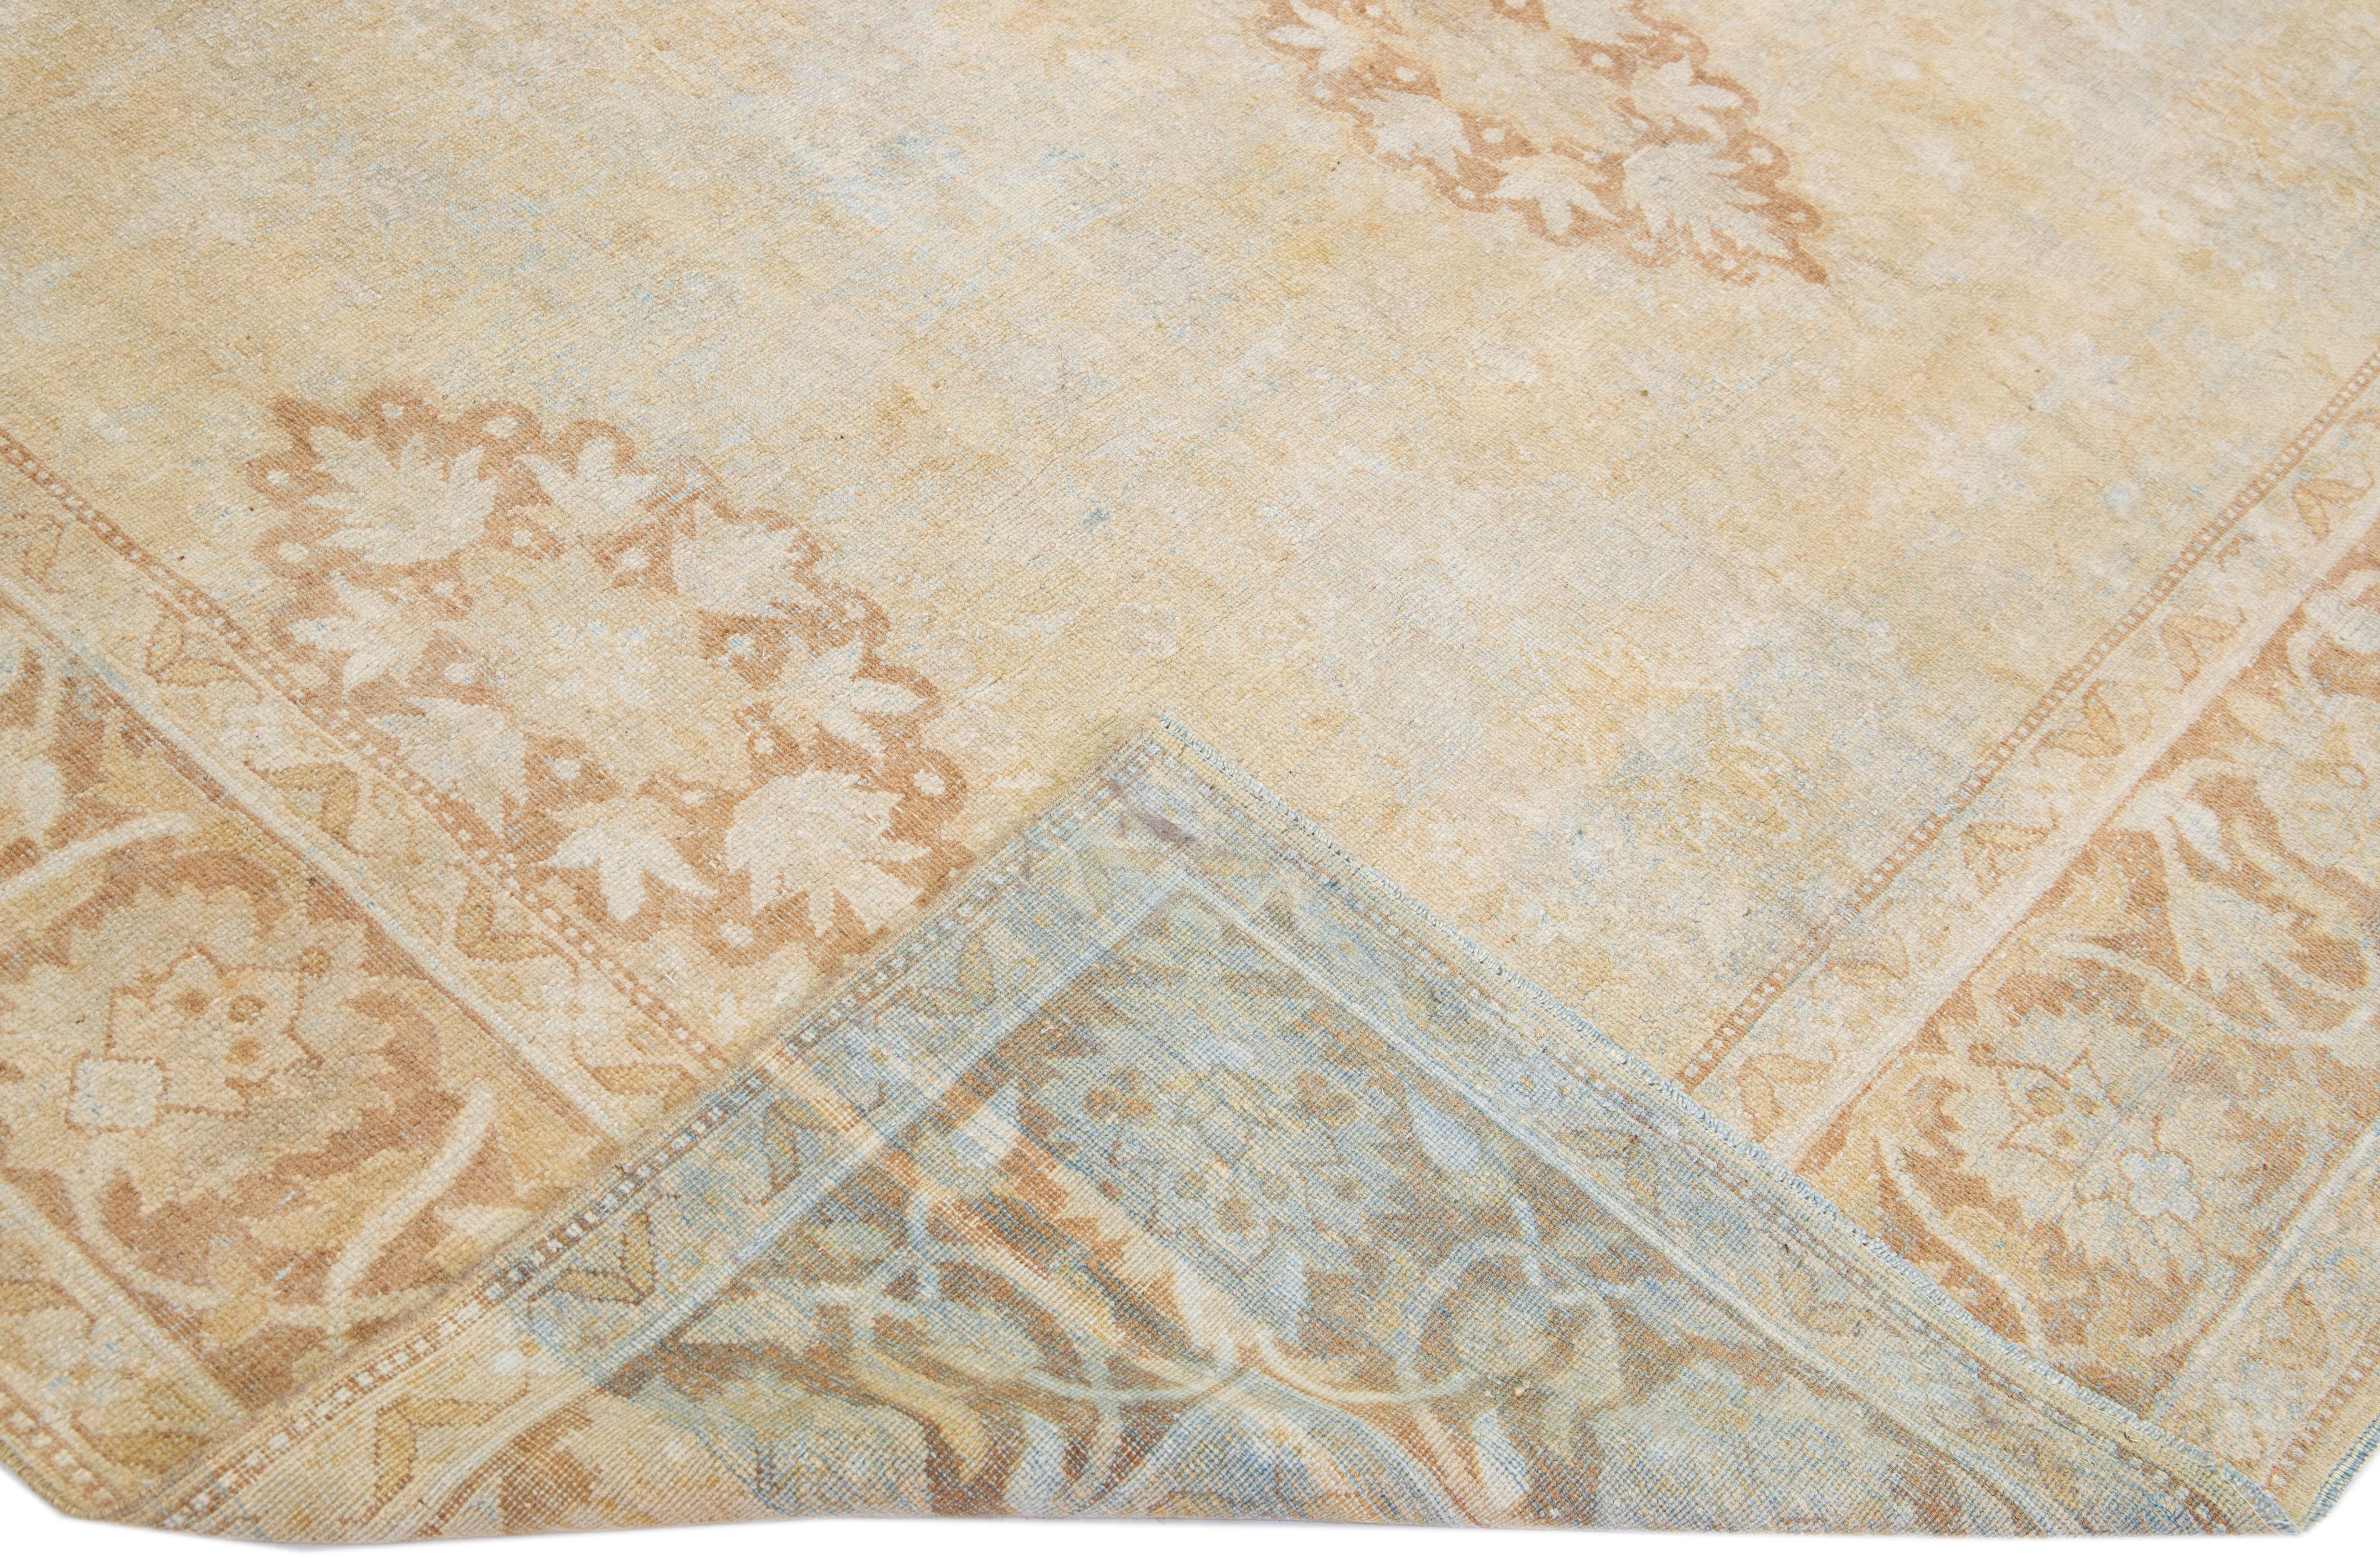 Beautiful antique Agra hand-knotted wool rug with a beige color field. This Indian rug has brown and blue accents in a gorgeous floral pattern design.

This rug measures: 9'7